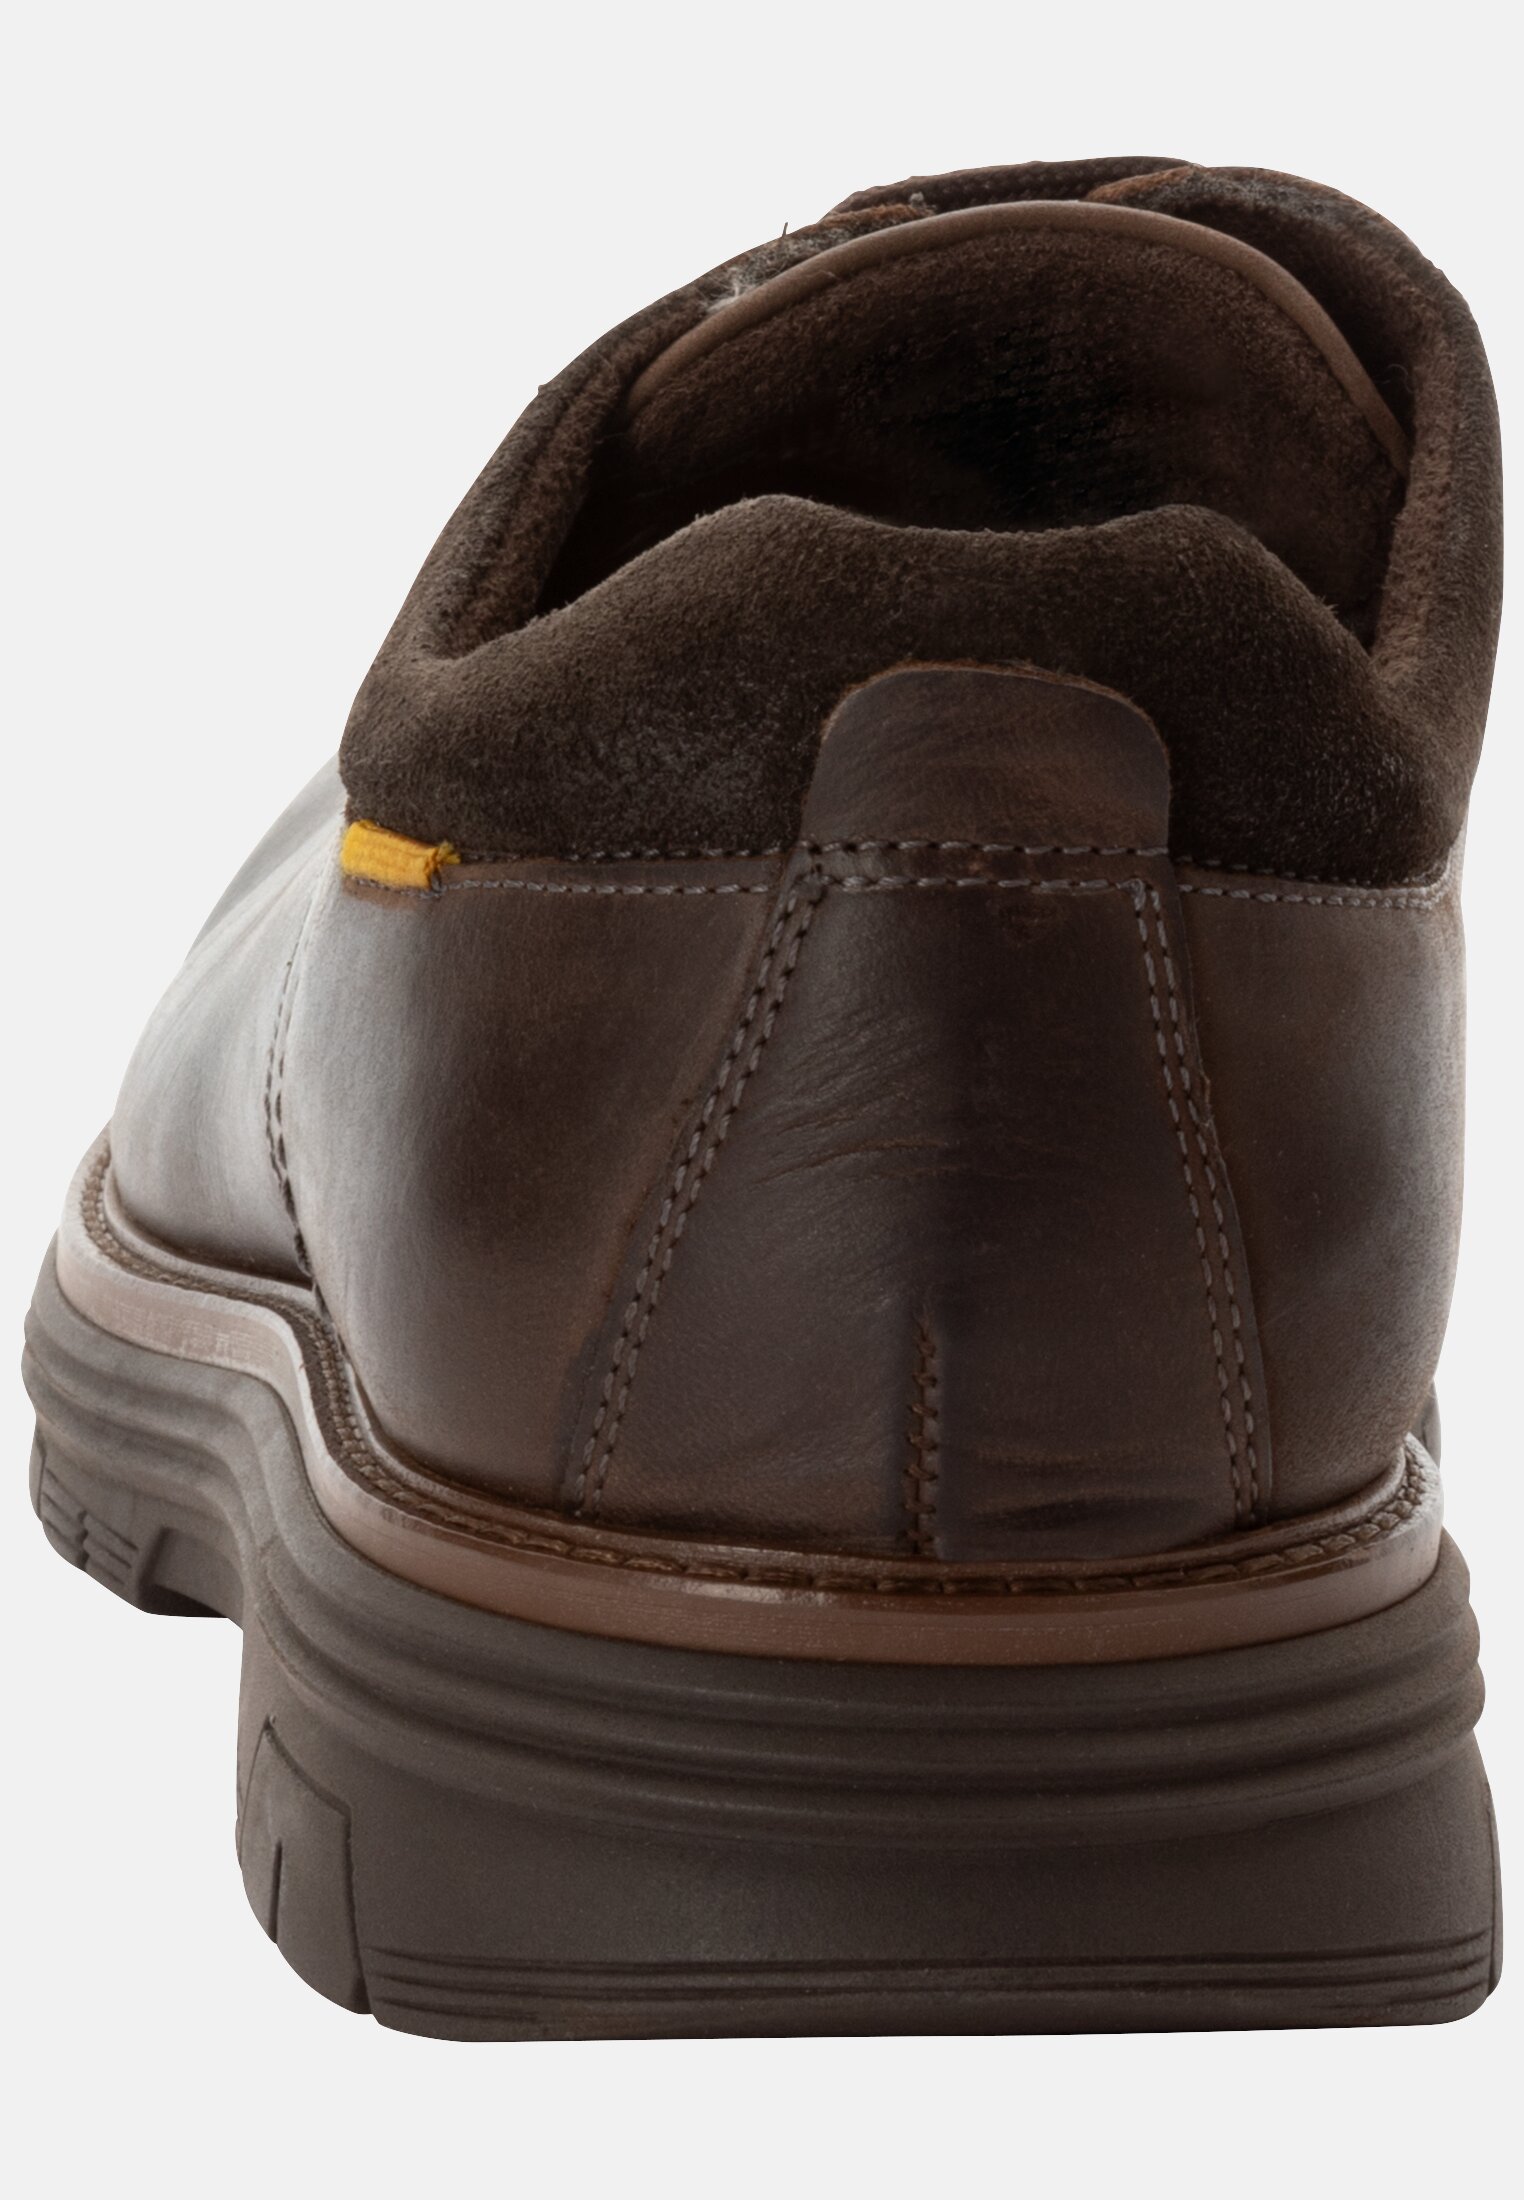 Lace-up shoe for Herren in Brown | 40 | camel active